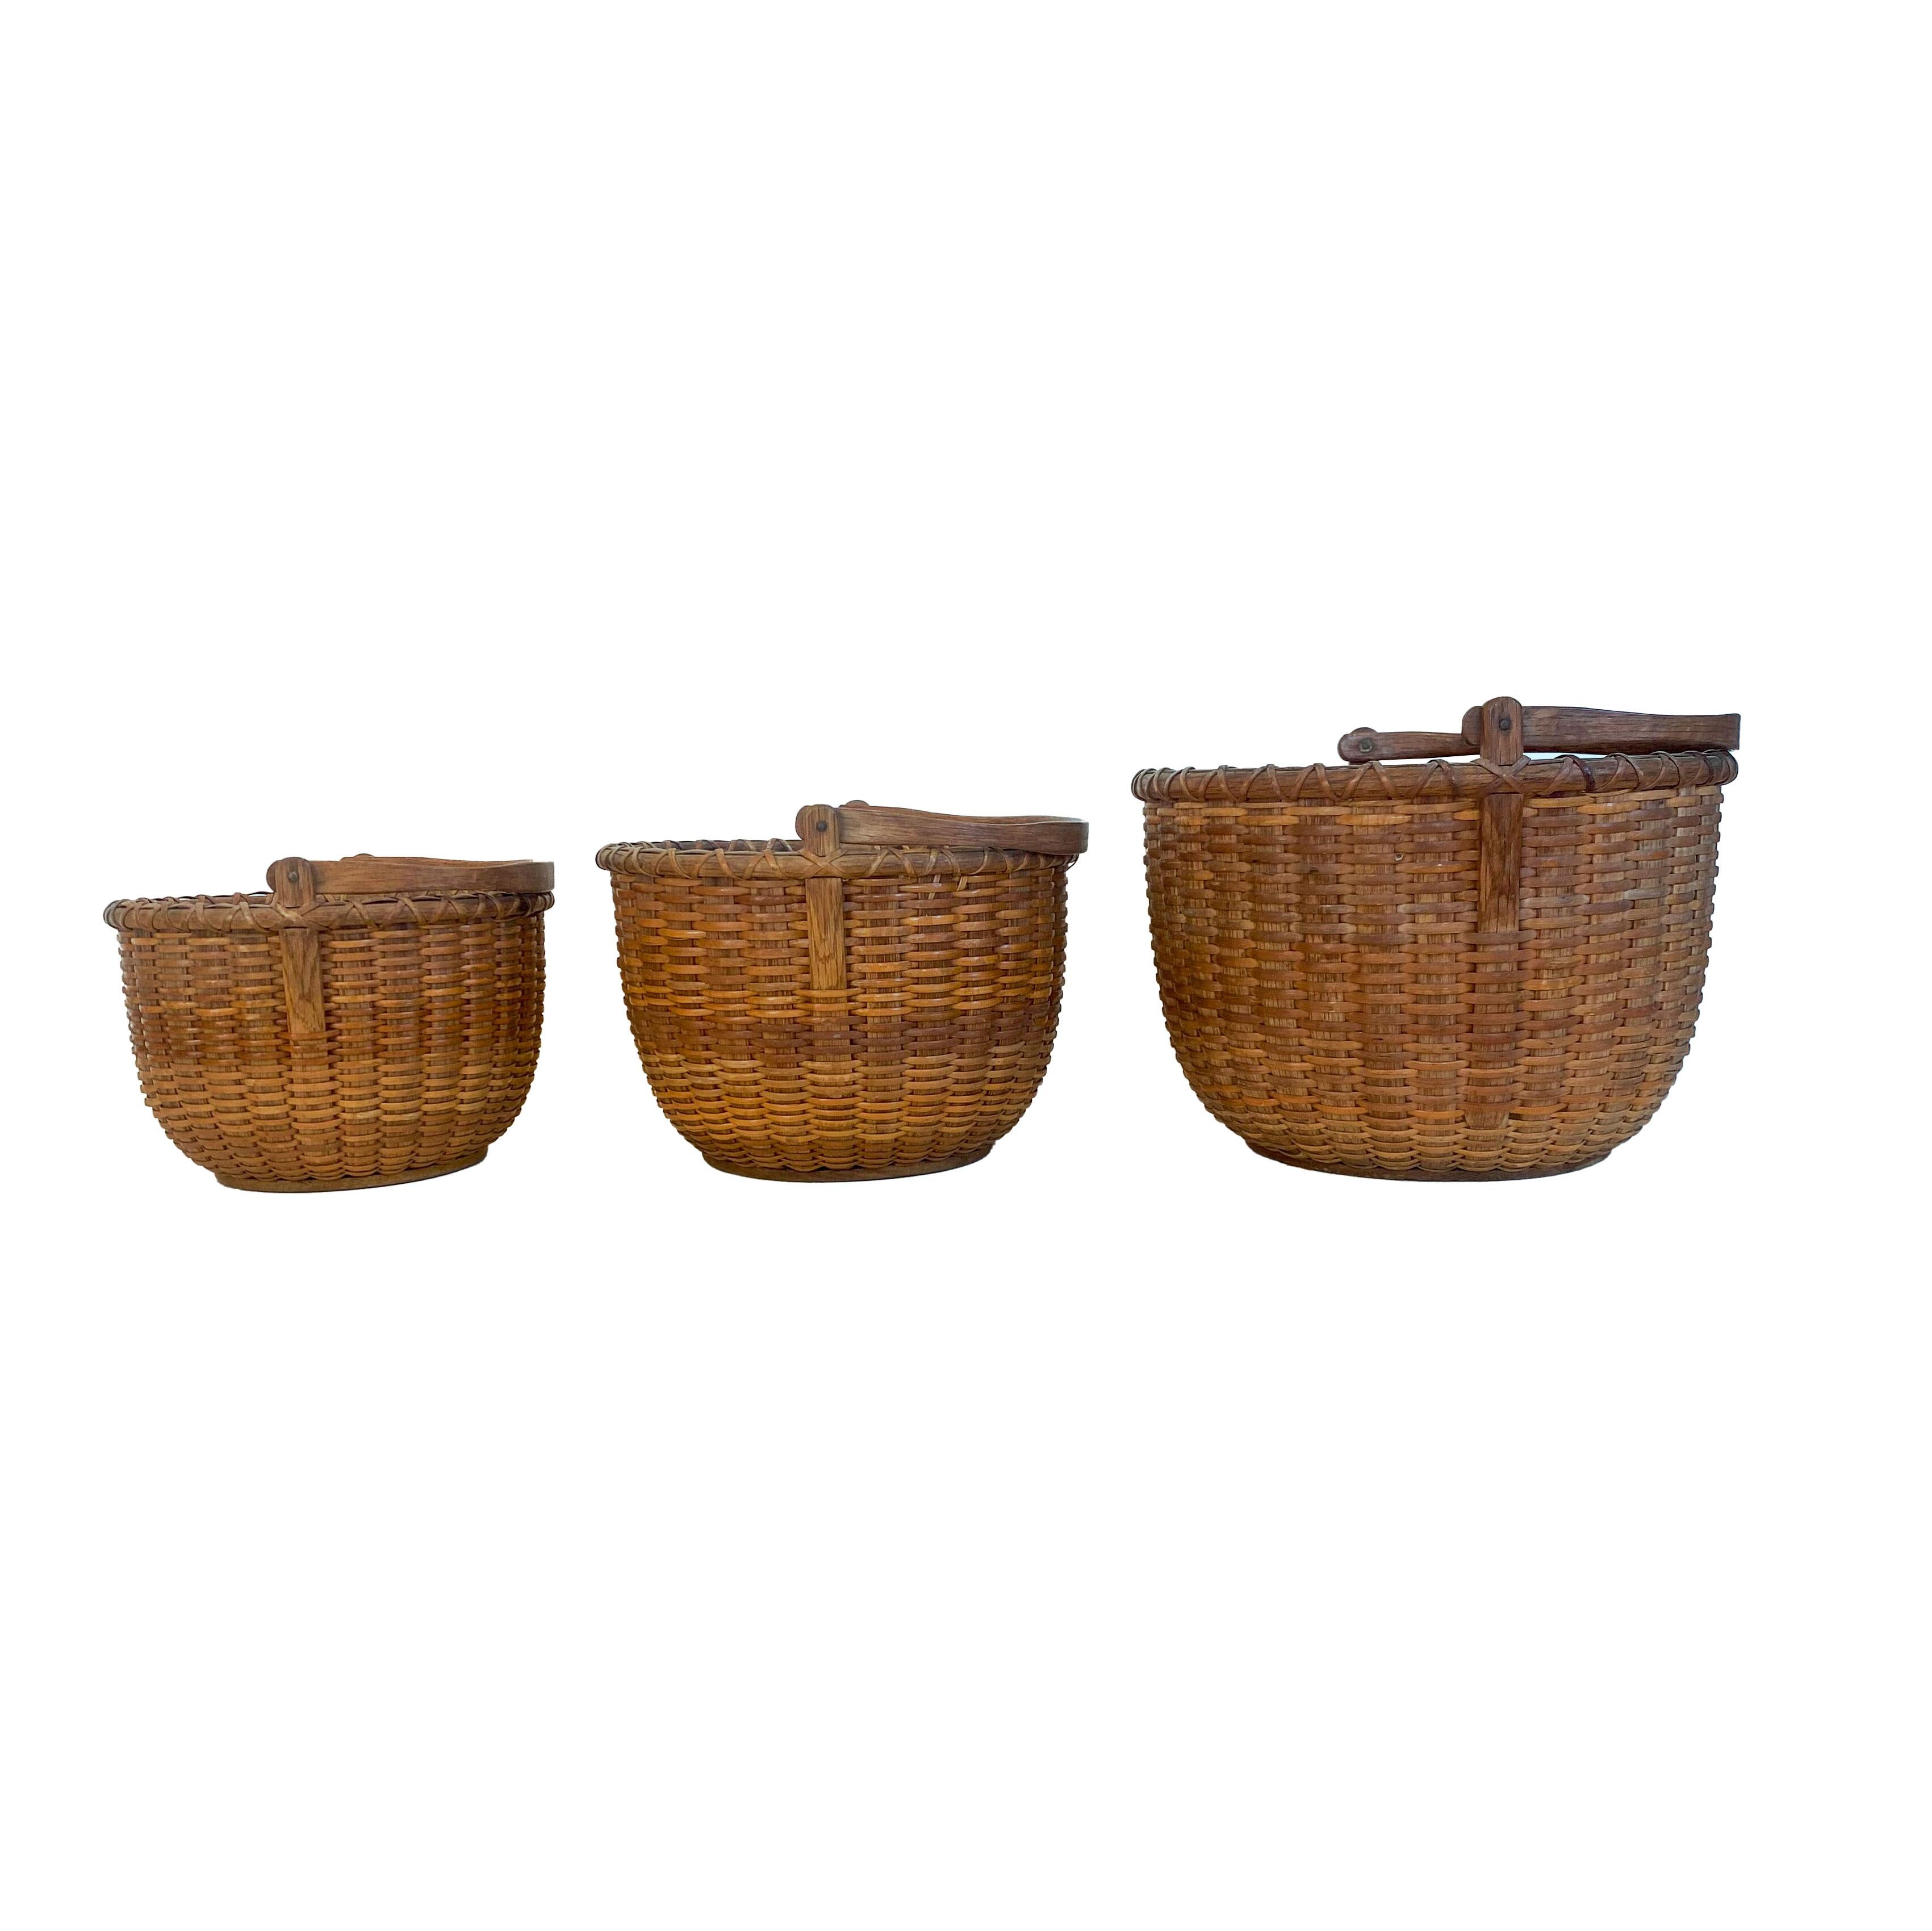 Nest of three Nantucket lightship baskets, the swing handles, staves and the ears ( which attach the handle to the basket) are all carved from oak. The bottoms are made from pine and each are stenciled with the maker's mark, 